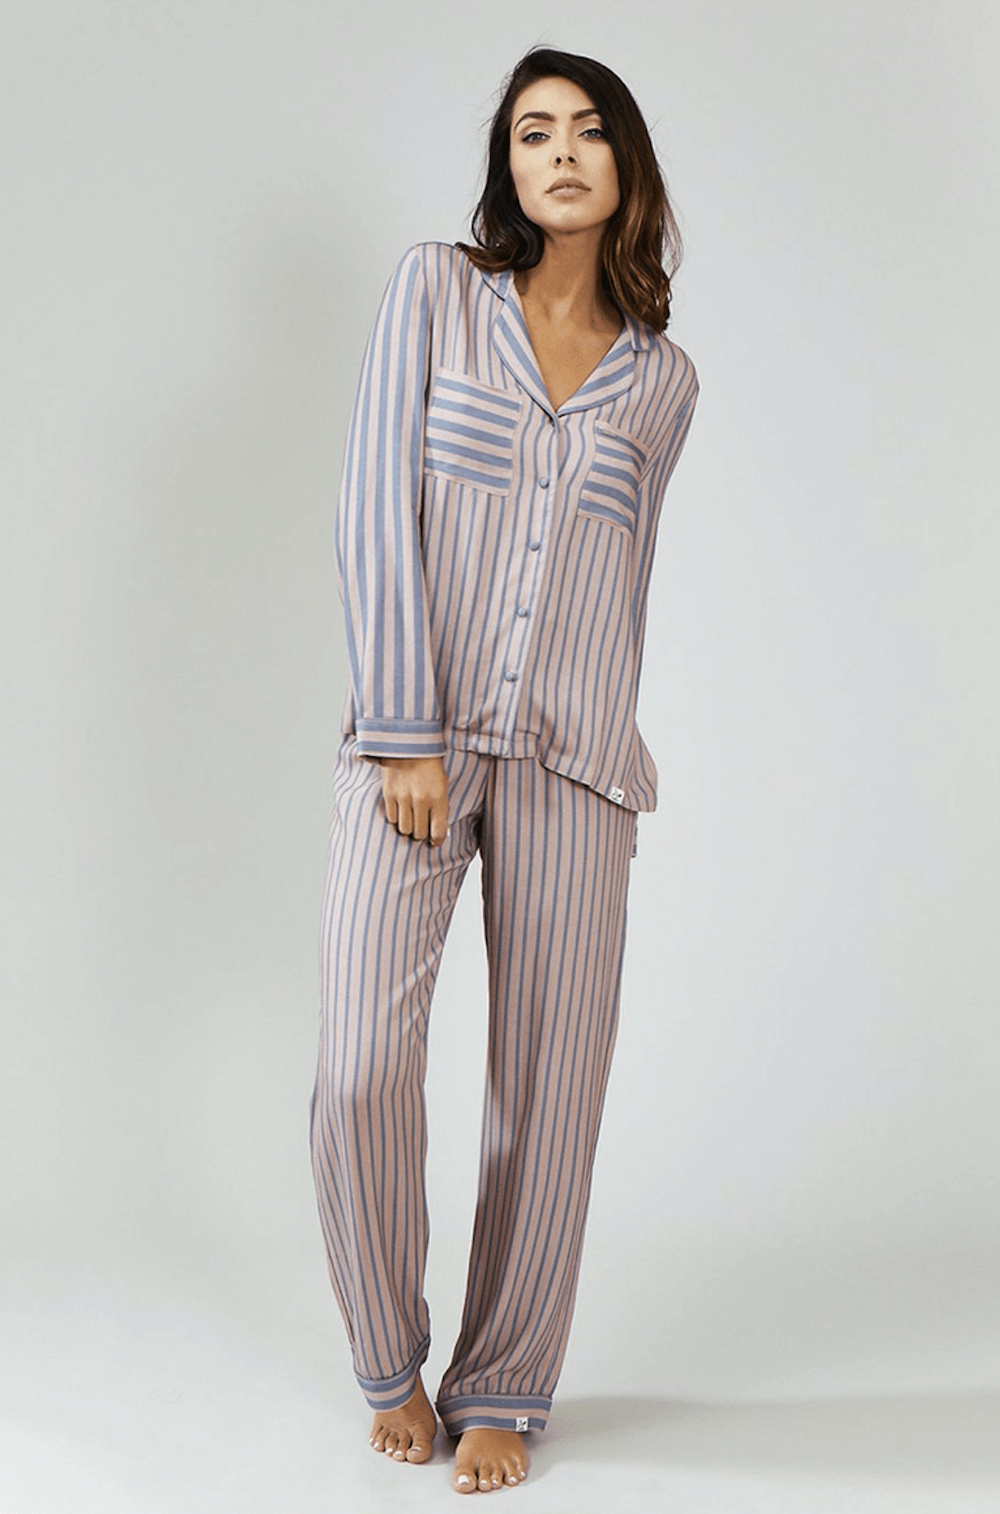 9 stylish pyjamas for a luxe lie-in